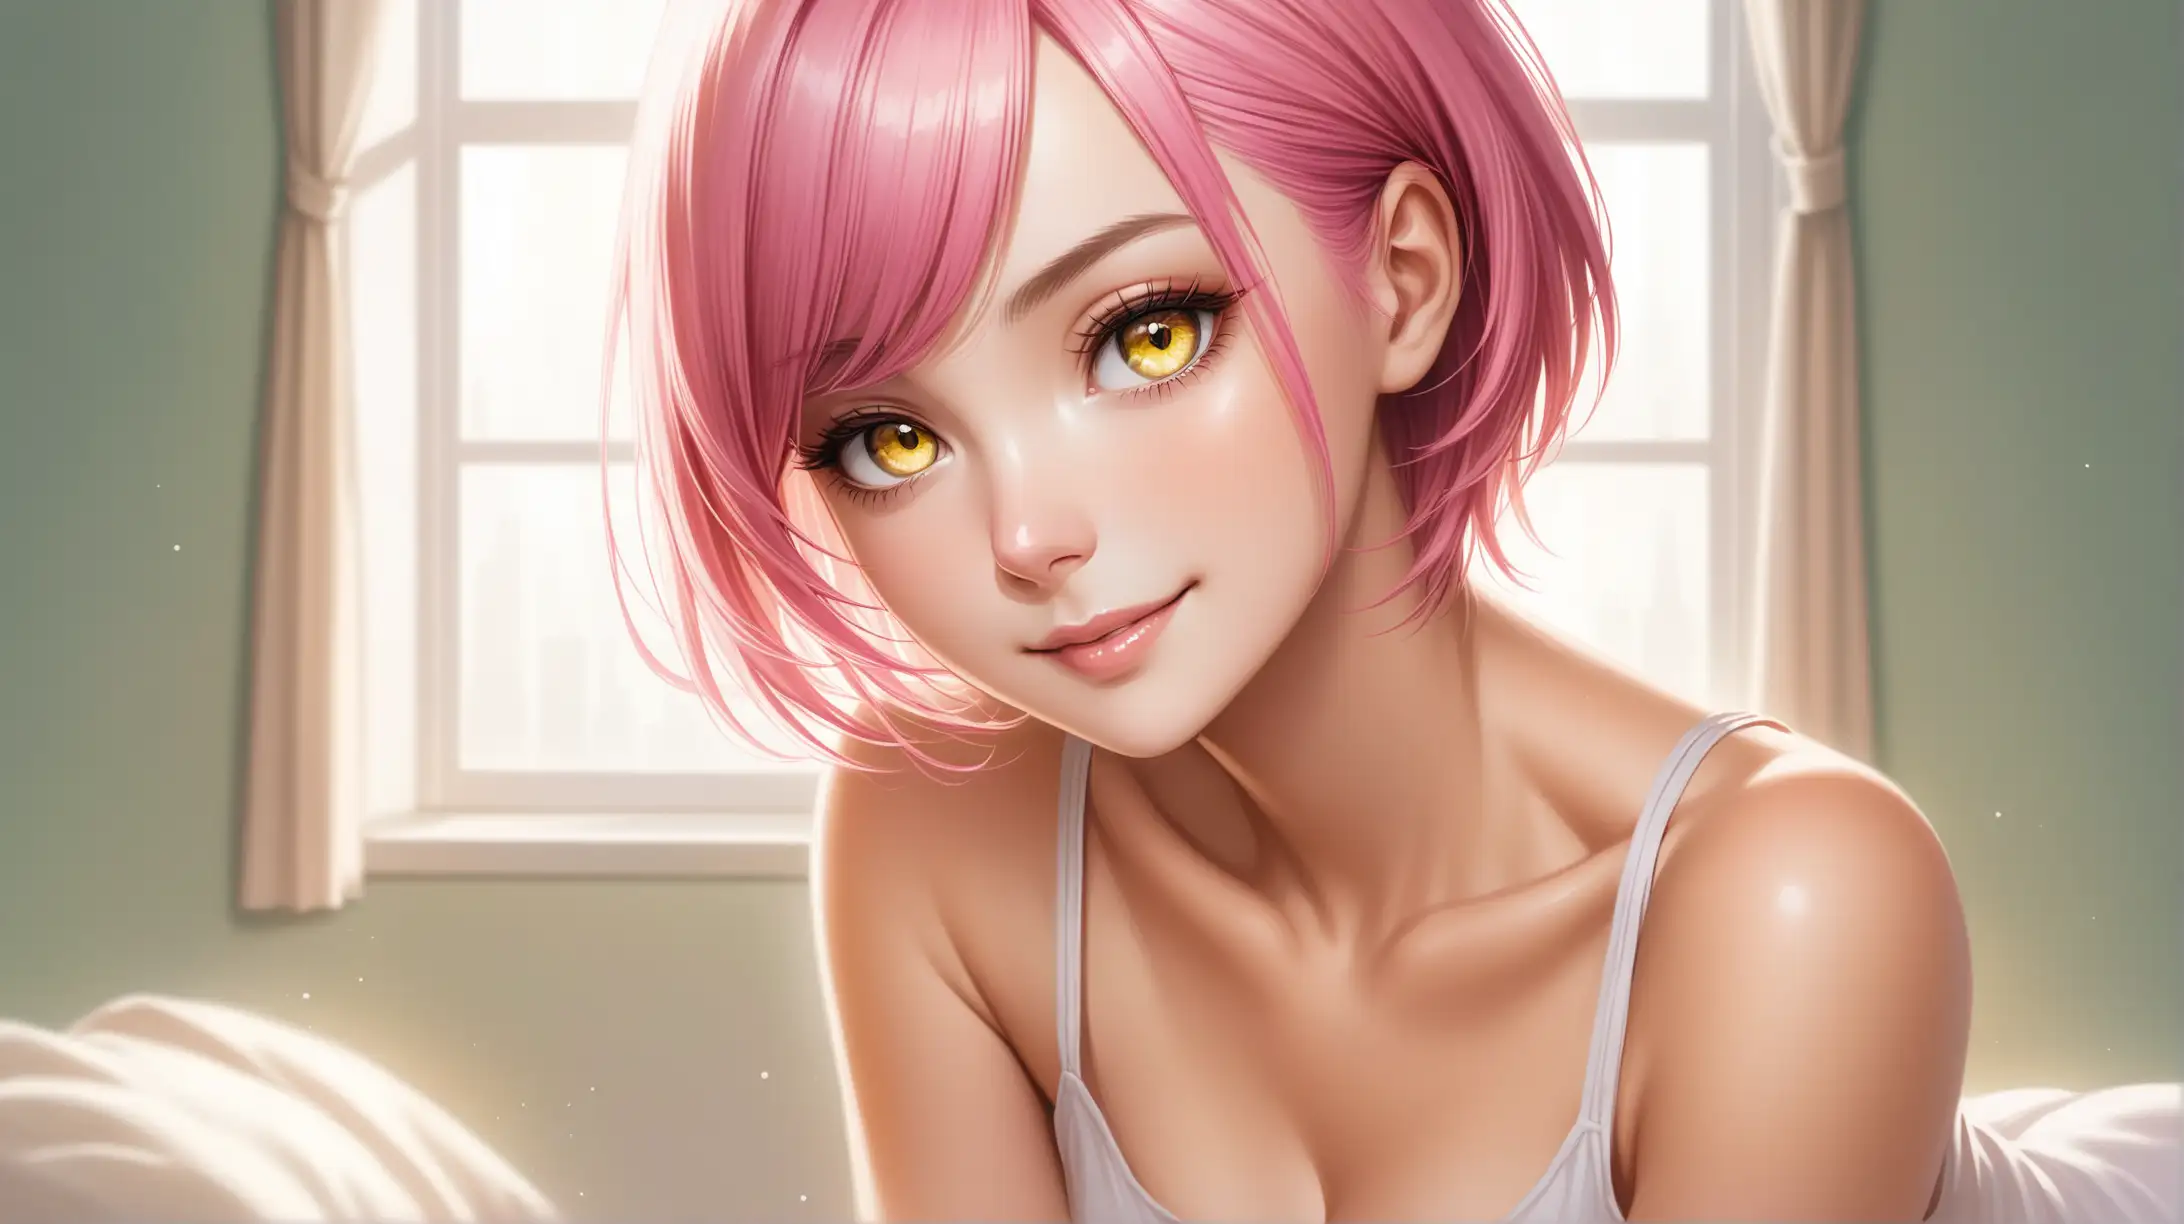 Draw a woman, short flat pink hair, yellow ringed eyes, slender figure, high quality, realistic, long shot, natural lighting, indoors, casual outfit, seductive pose, smiling toward the viewer